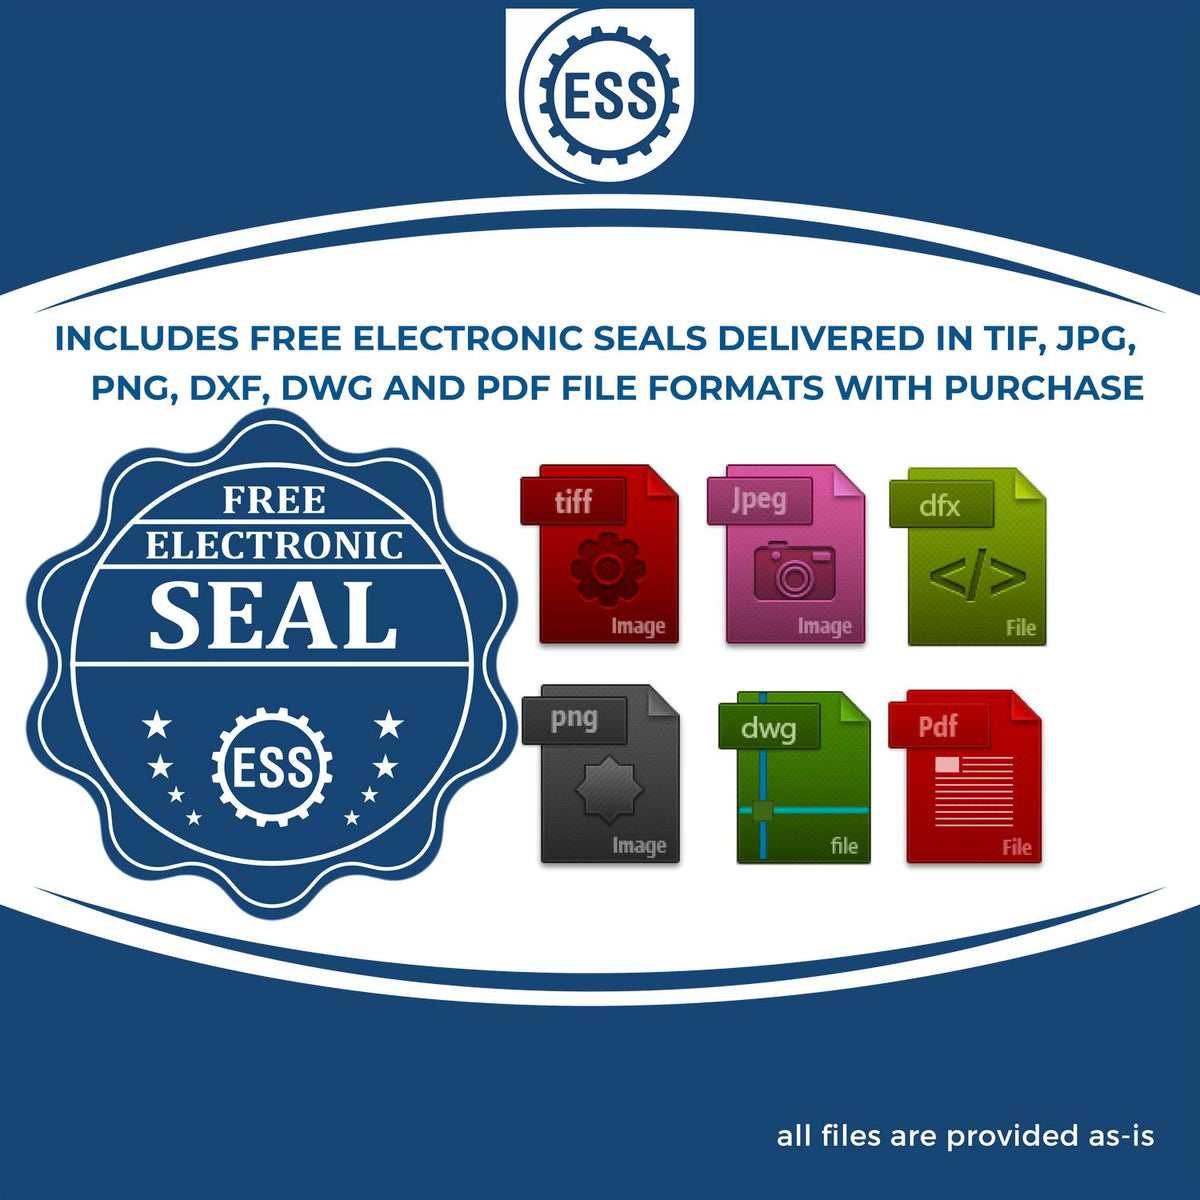 An infographic for the free electronic seal for the Heavy-Duty Ohio Rectangular Notary Stamp illustrating the different file type icons such as DXF, DWG, TIF, JPG and PNG.